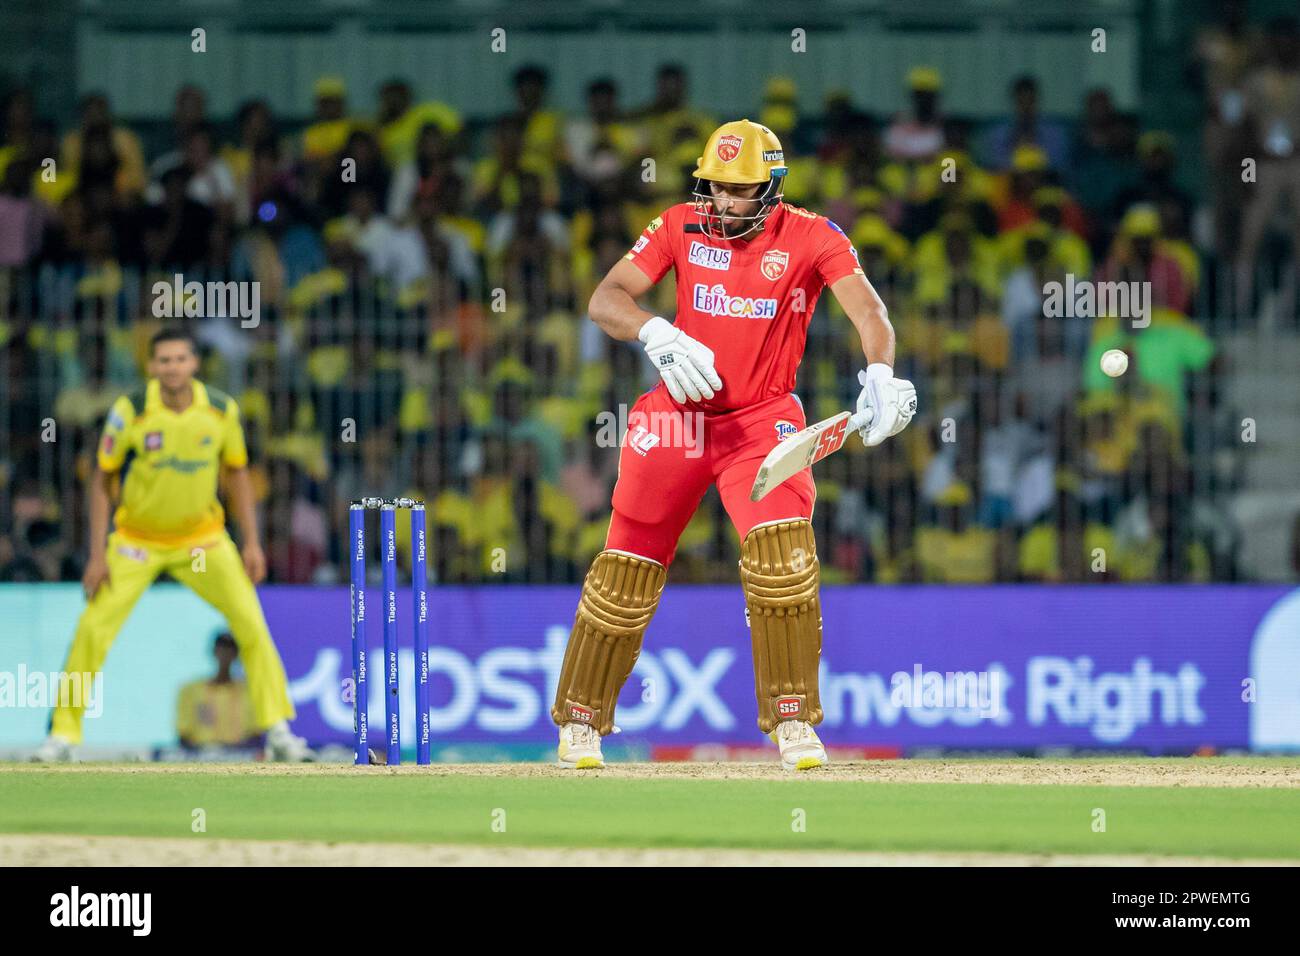 Shahrukh Khan of Punjab Kings plays a shot during the Indian ...